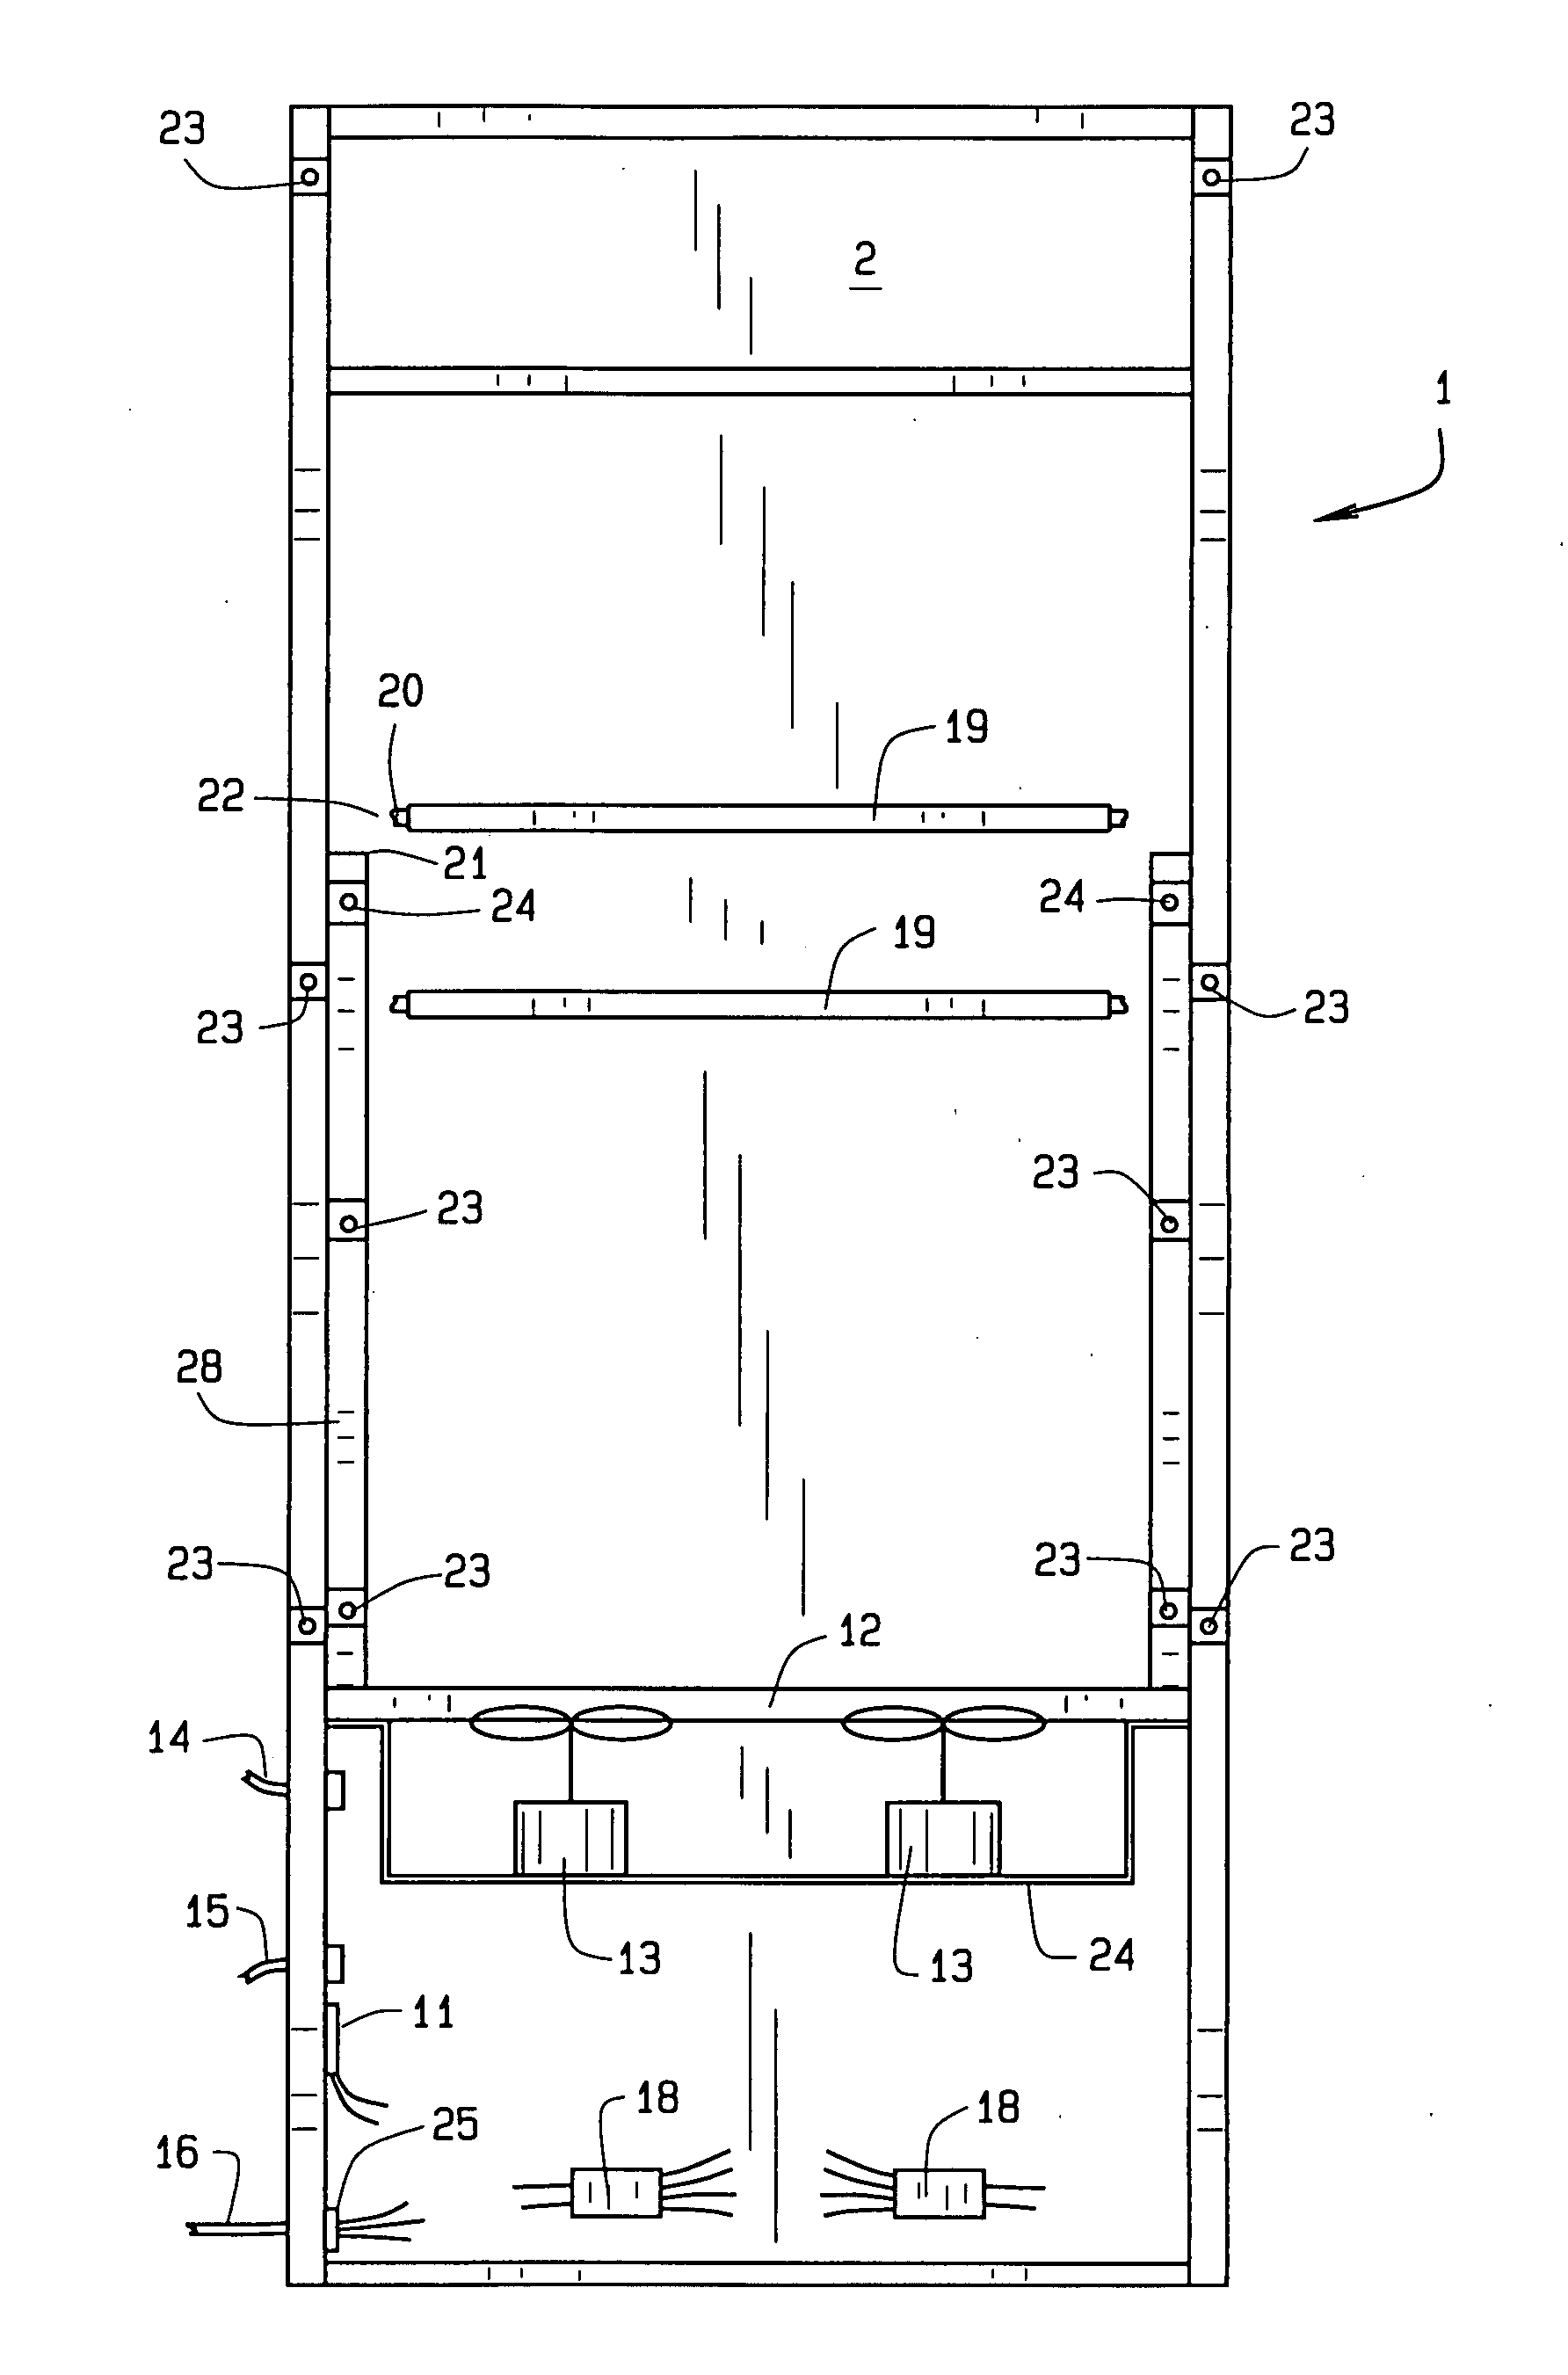 Air purification system and apparatus